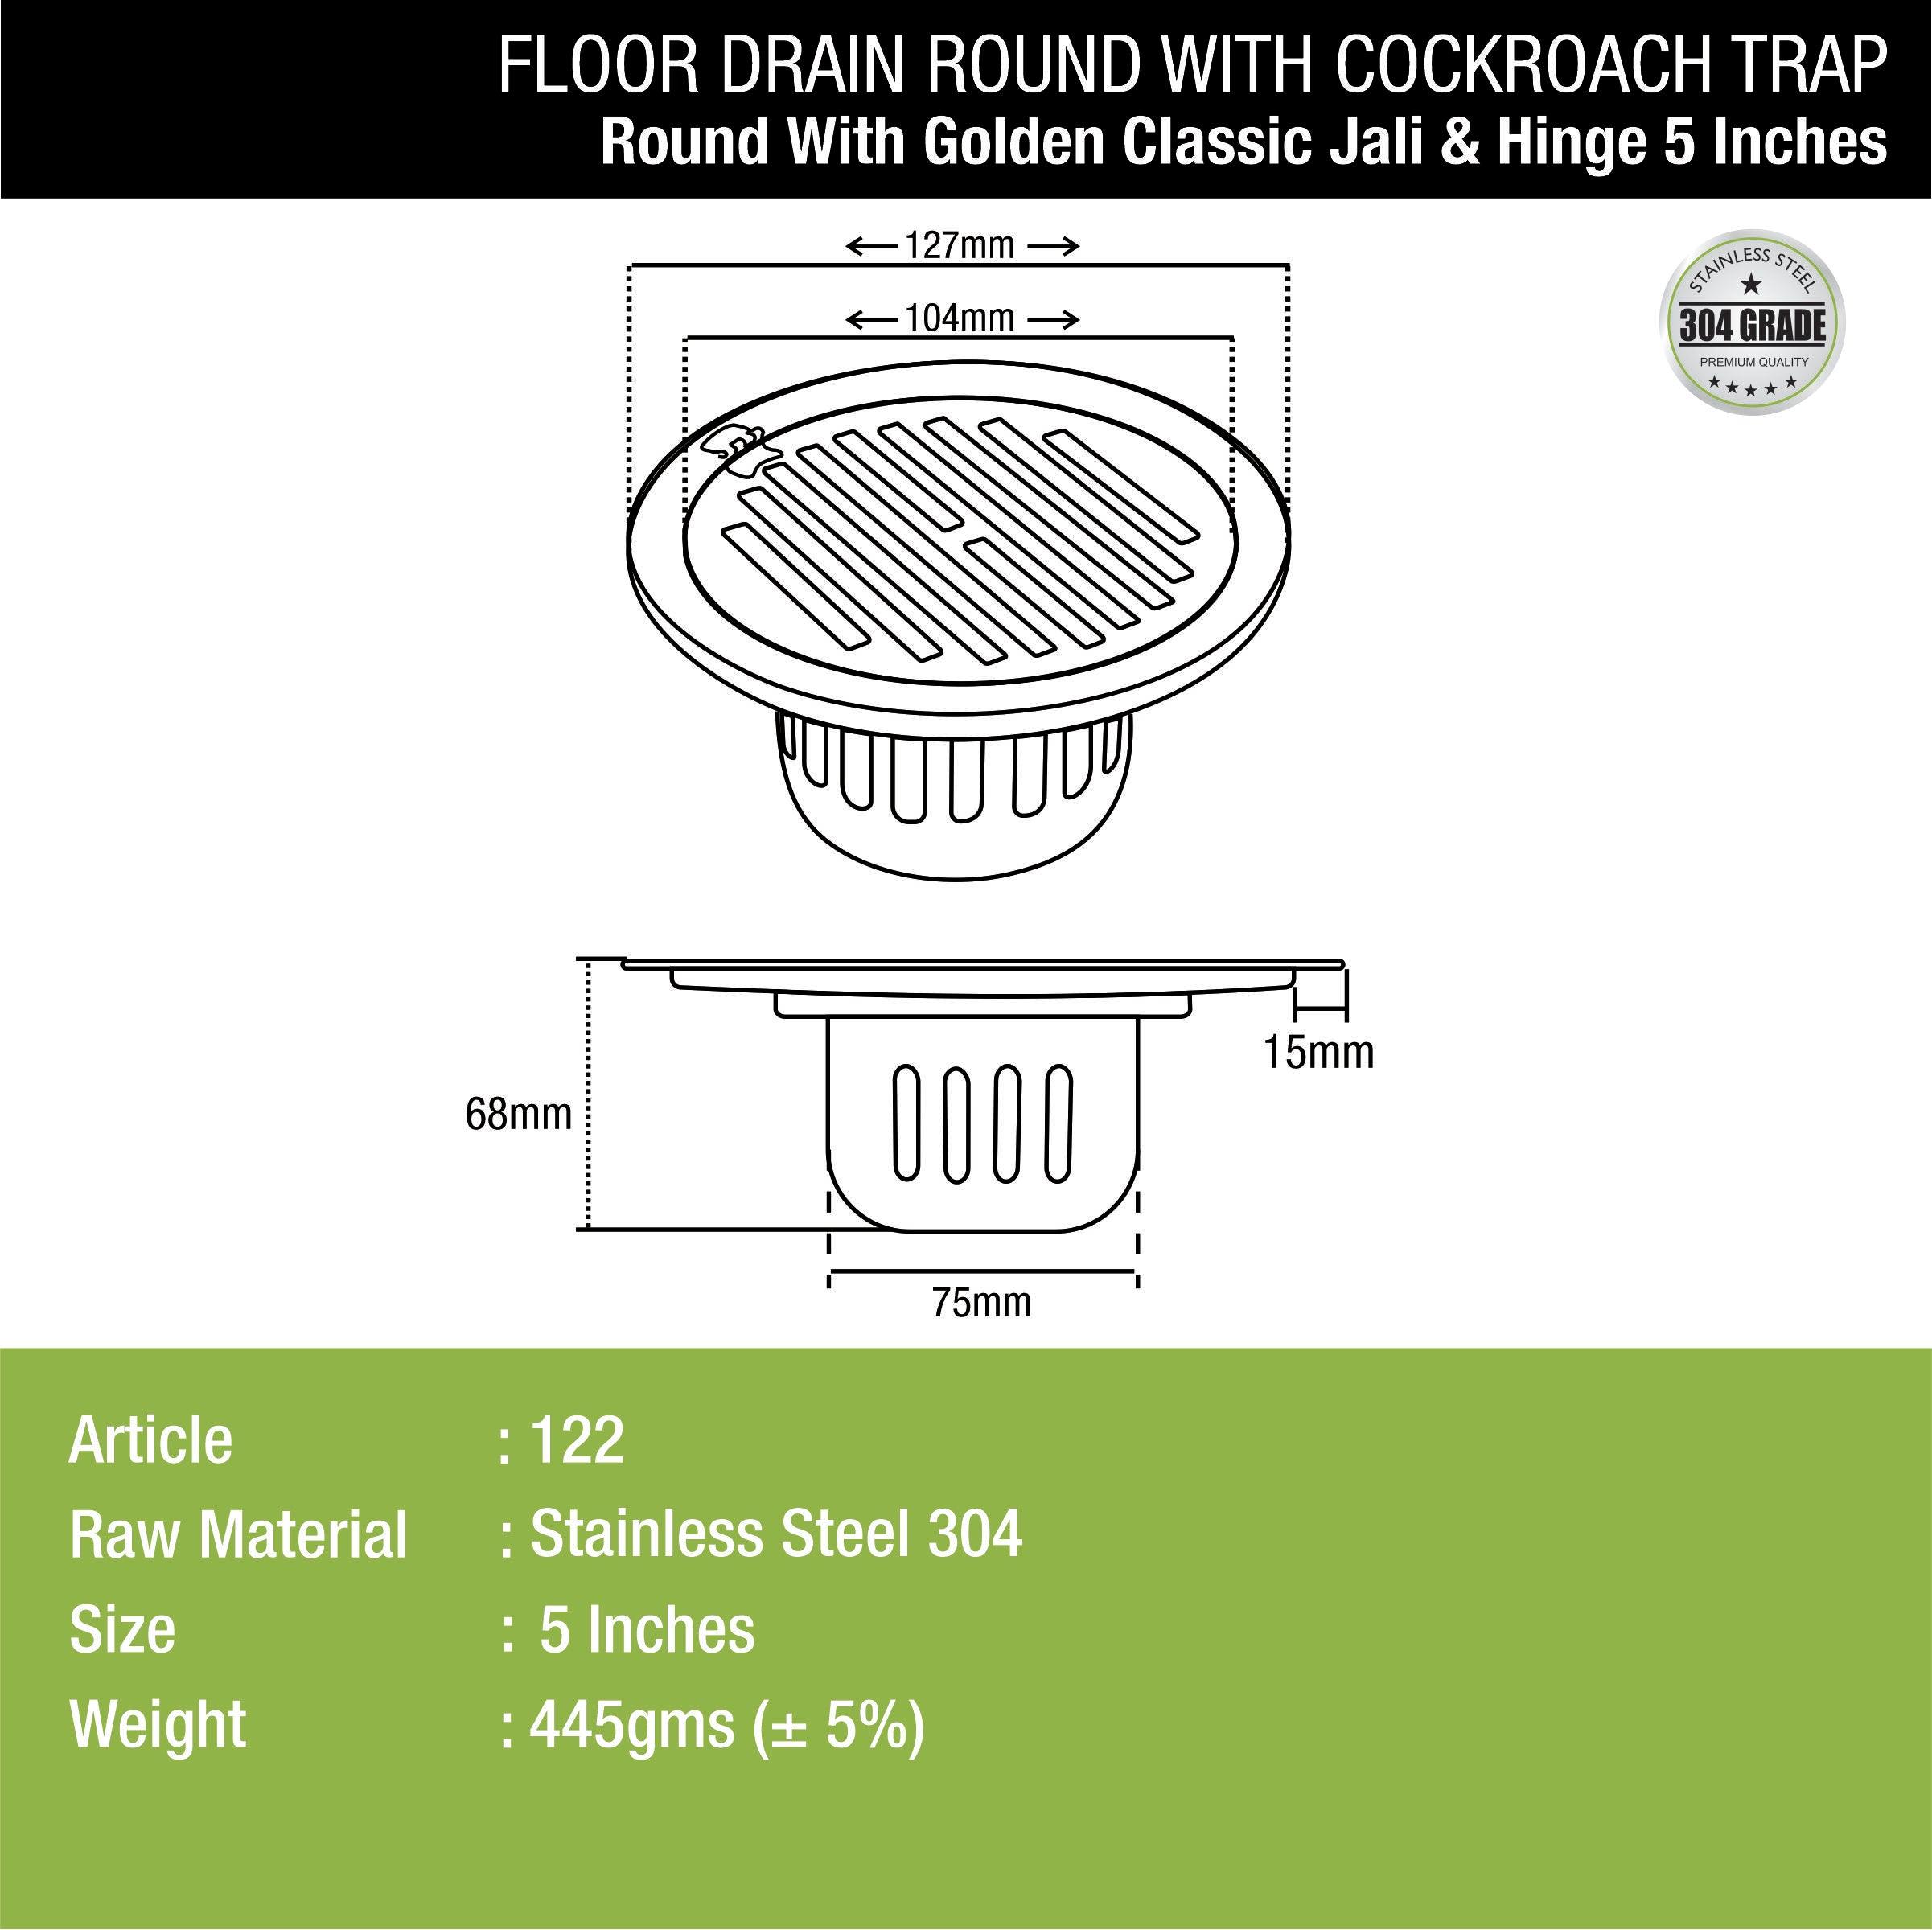 Golden Classic Jali Round Floor Drain (5 Inches) with Hinge and Cockroach Trap dimensions and sizes